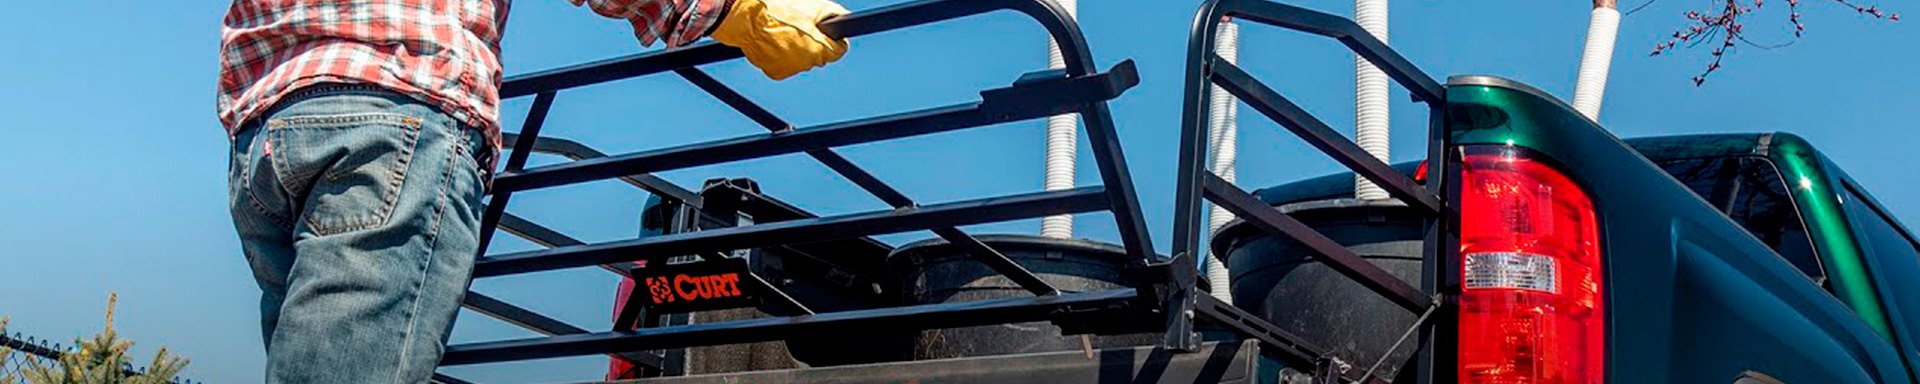 Maximize Your Truck’s Storage Space With All-New Bed Extenders by CURT